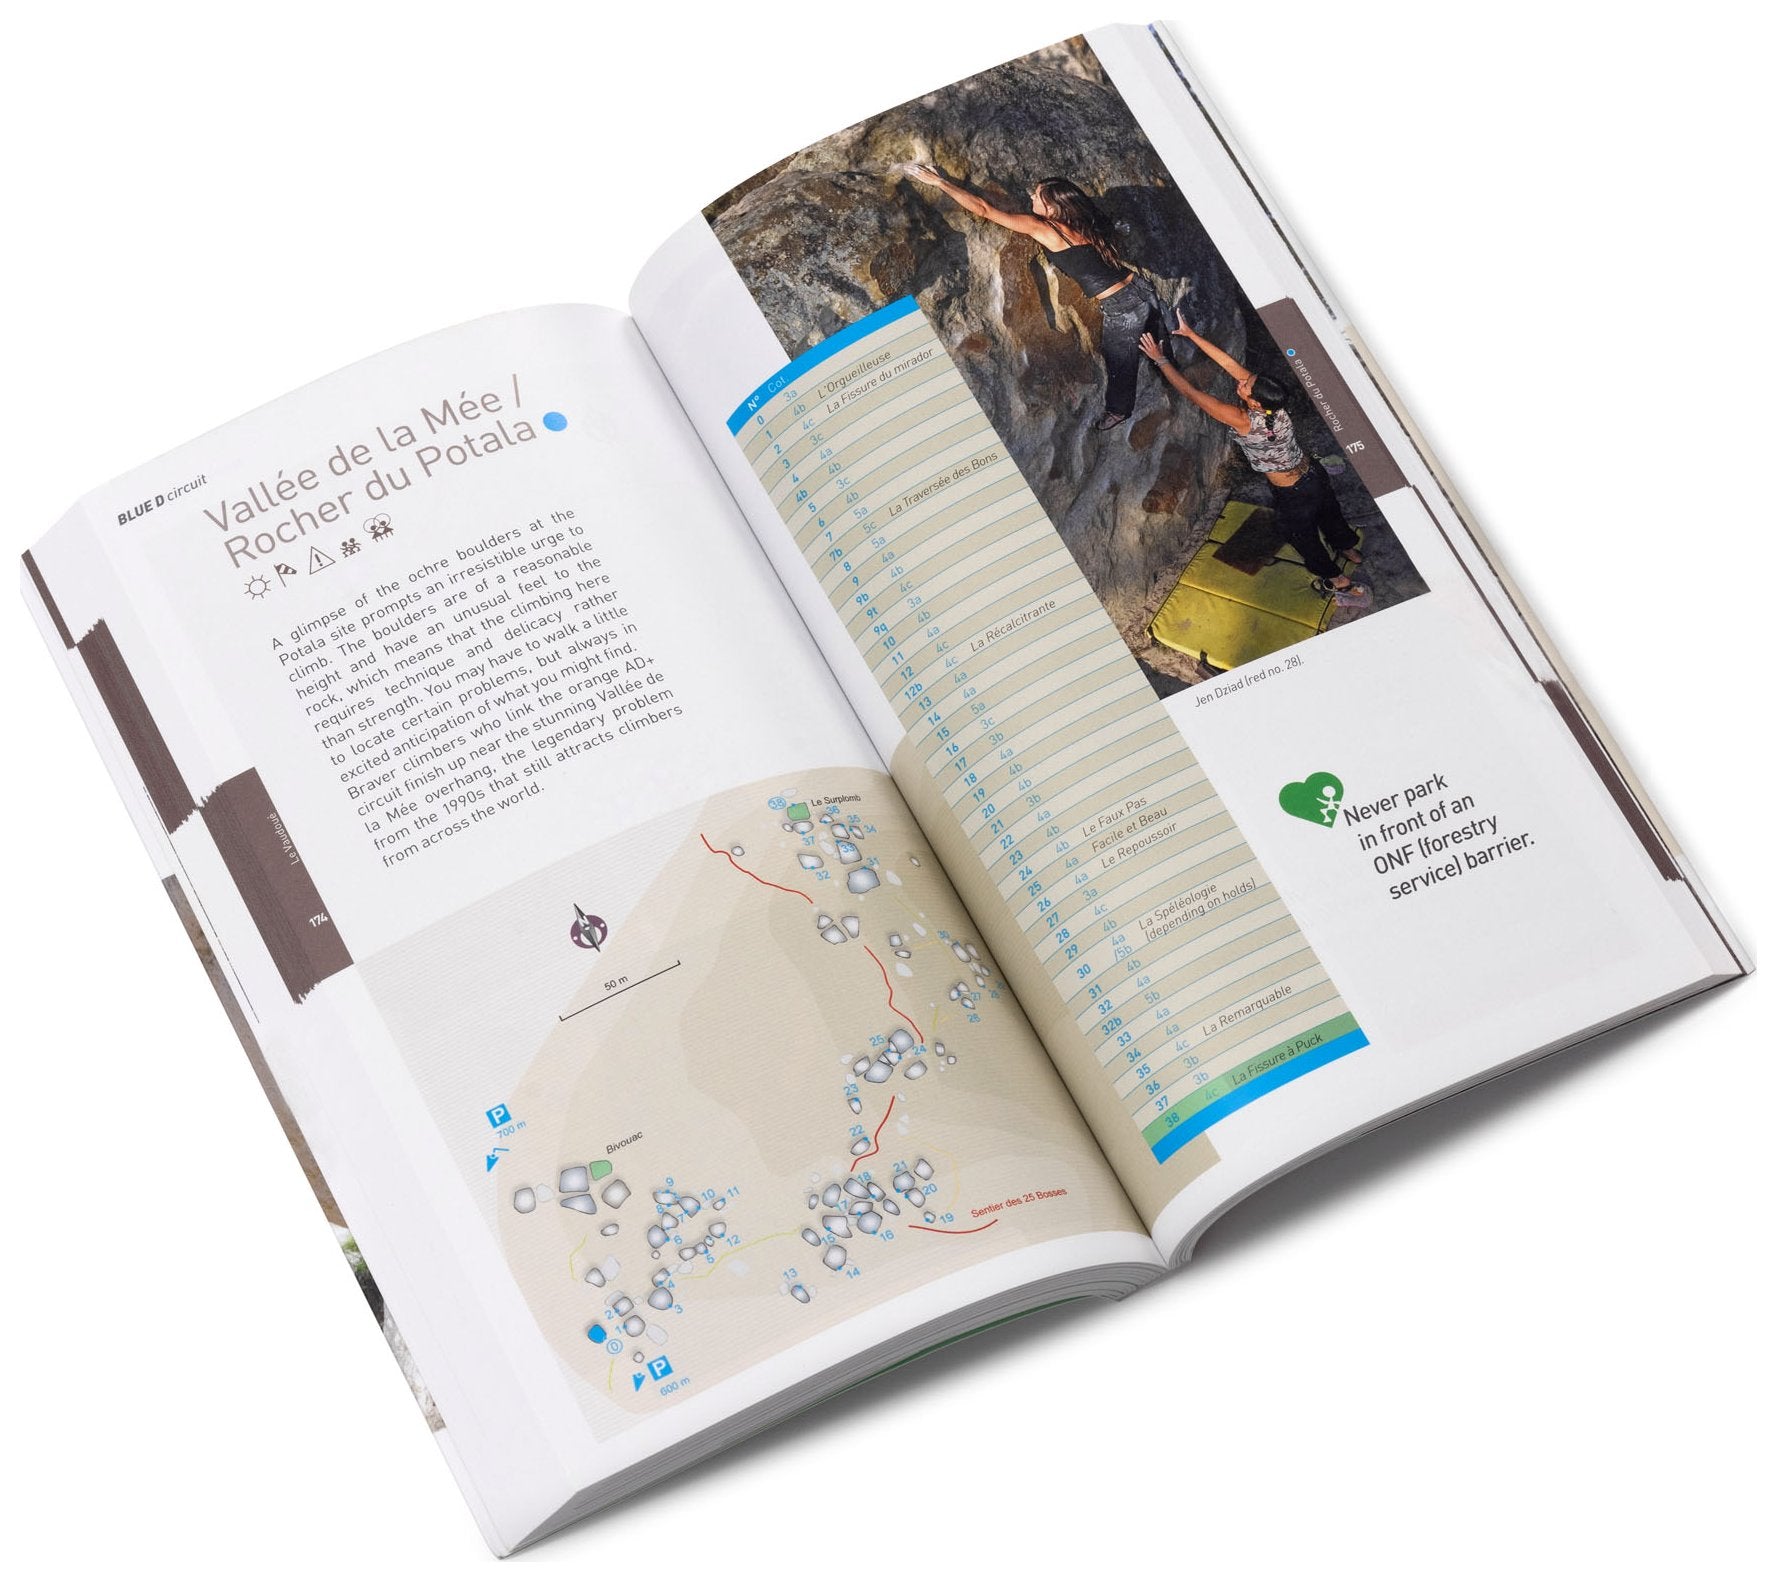 Fontainebleau Climbs, guidebook